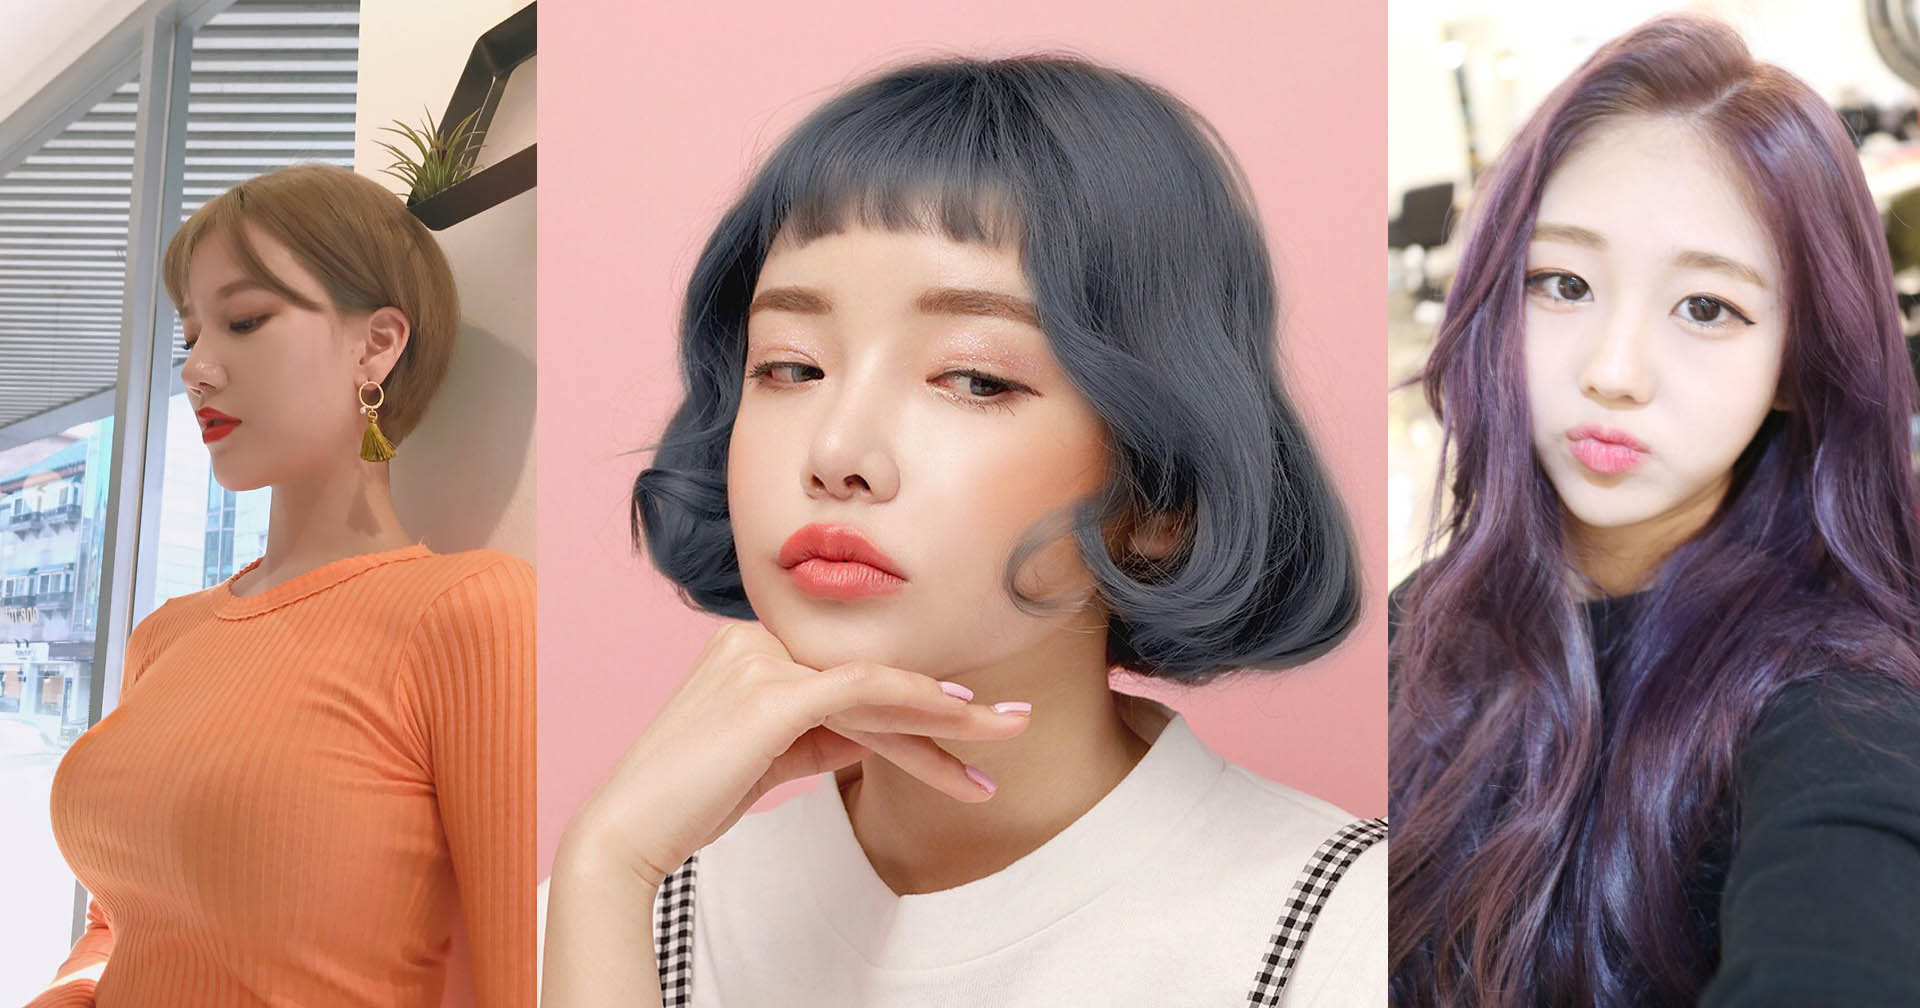 Why Korean cosmetics and makeup so popular?